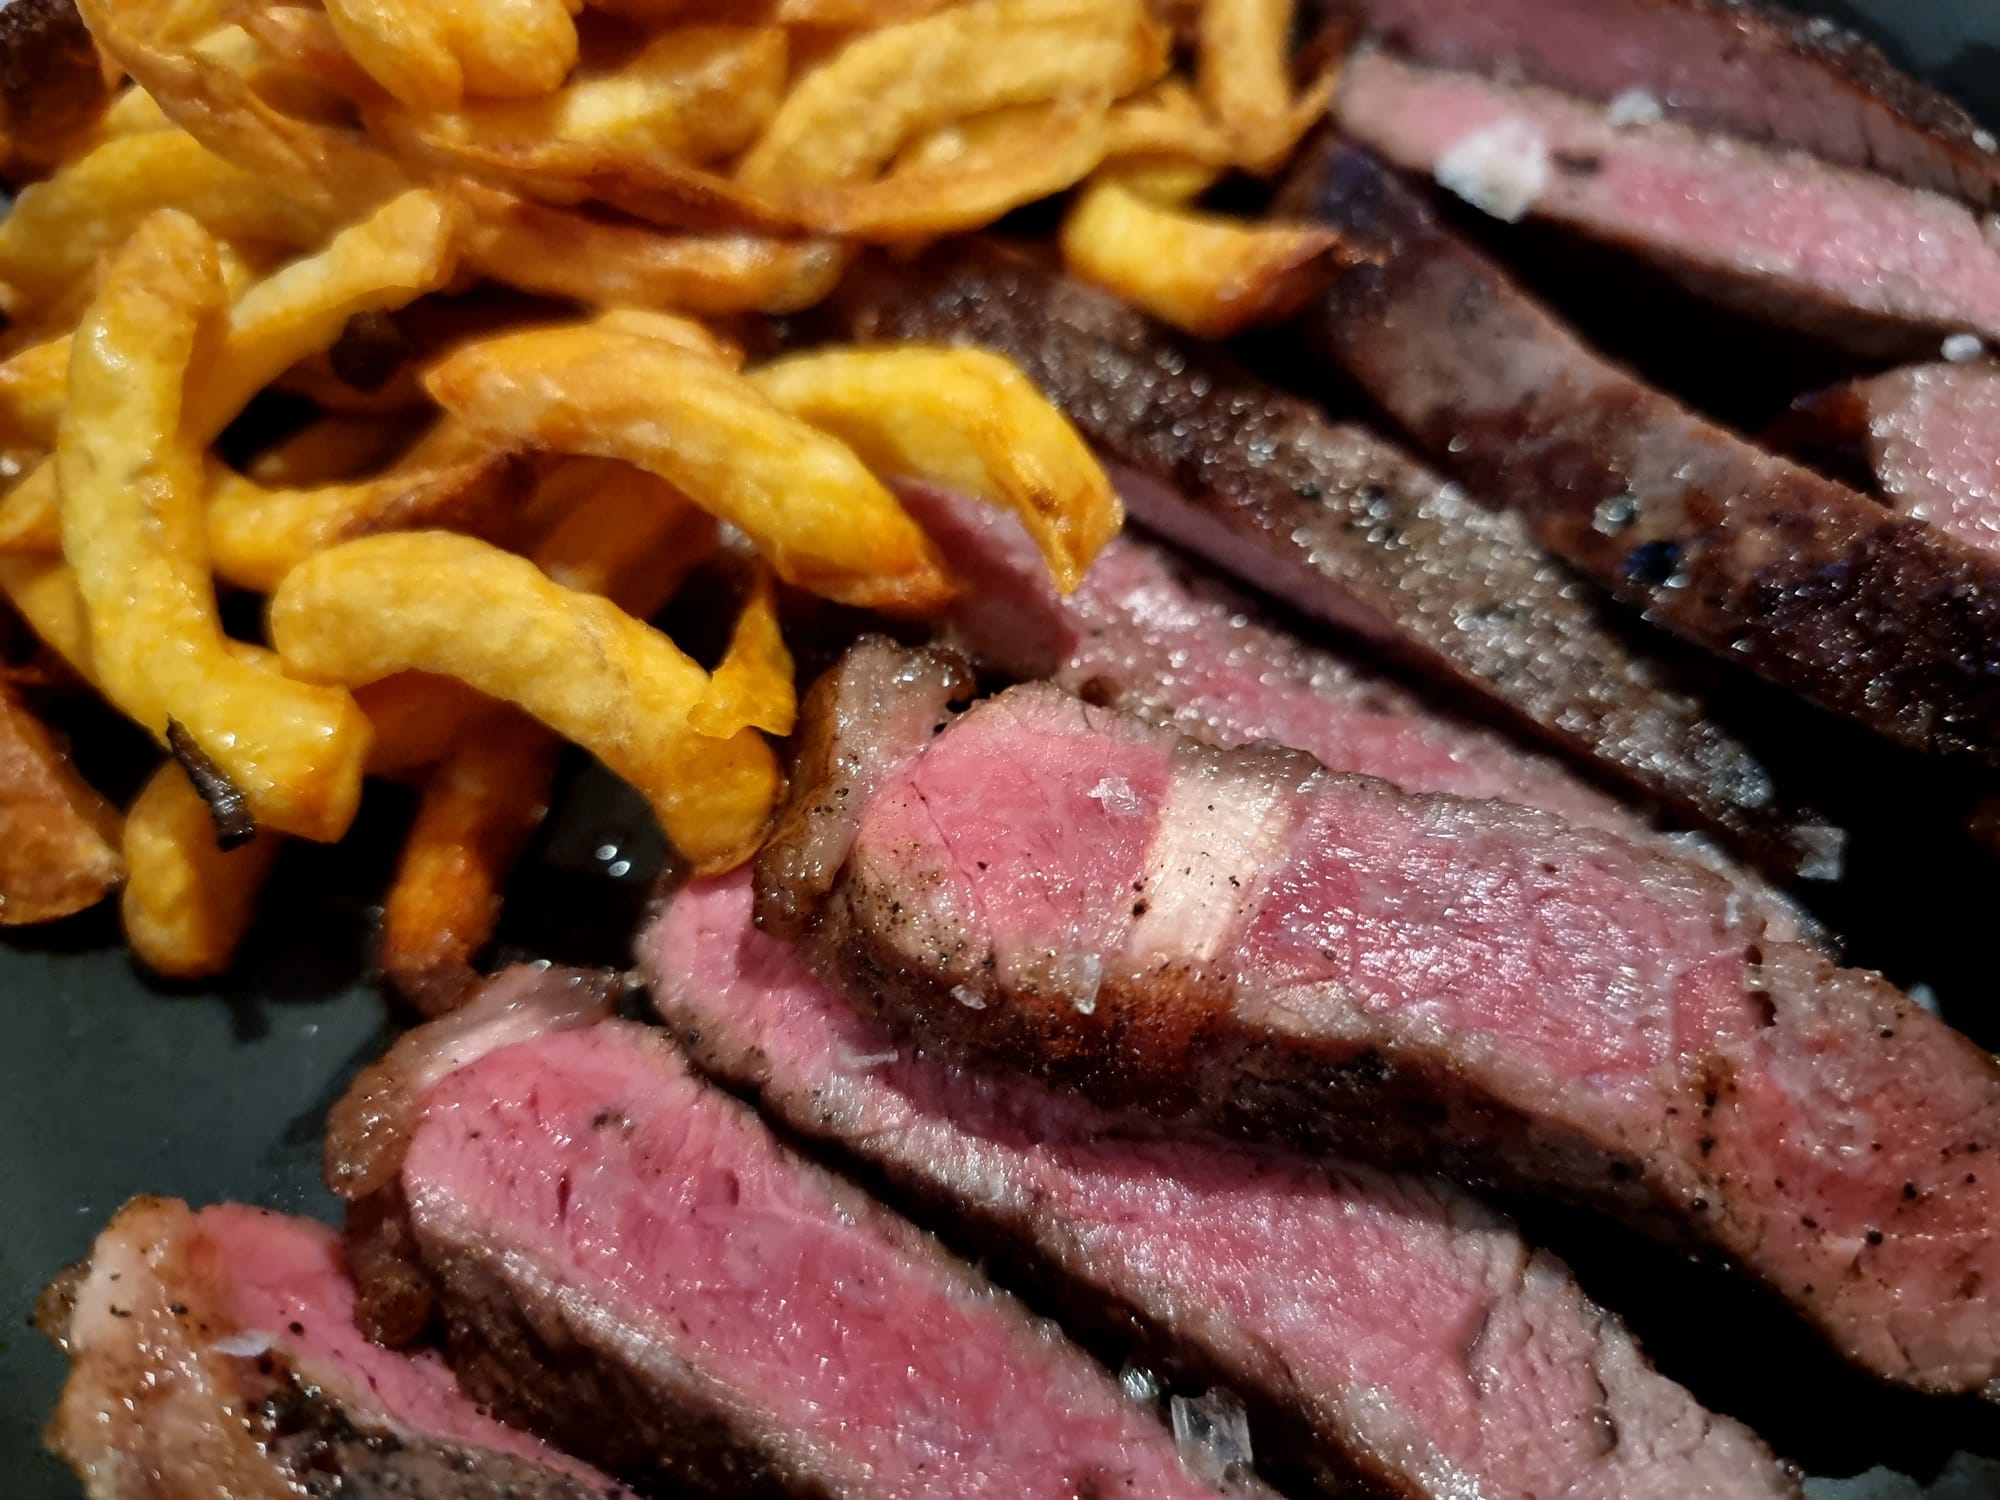 Medium rare steak cut into strips, with a whole bunch of crispy fries